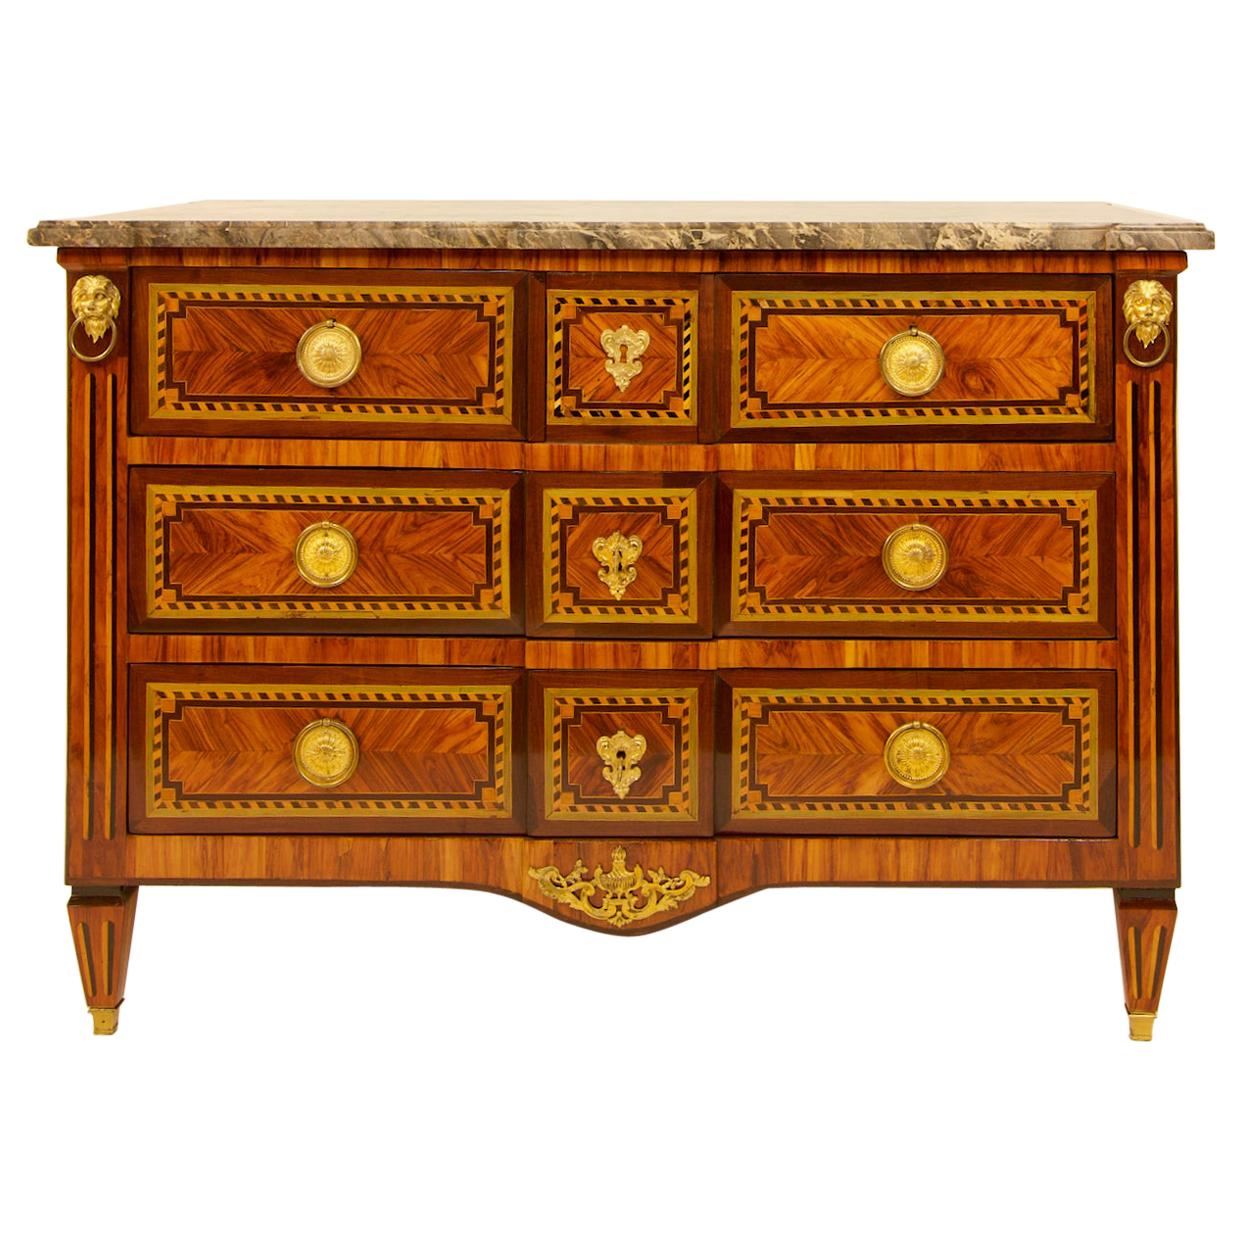 Large French 18th Century Louis XVI Marquetry Commode or Chest of Drawers